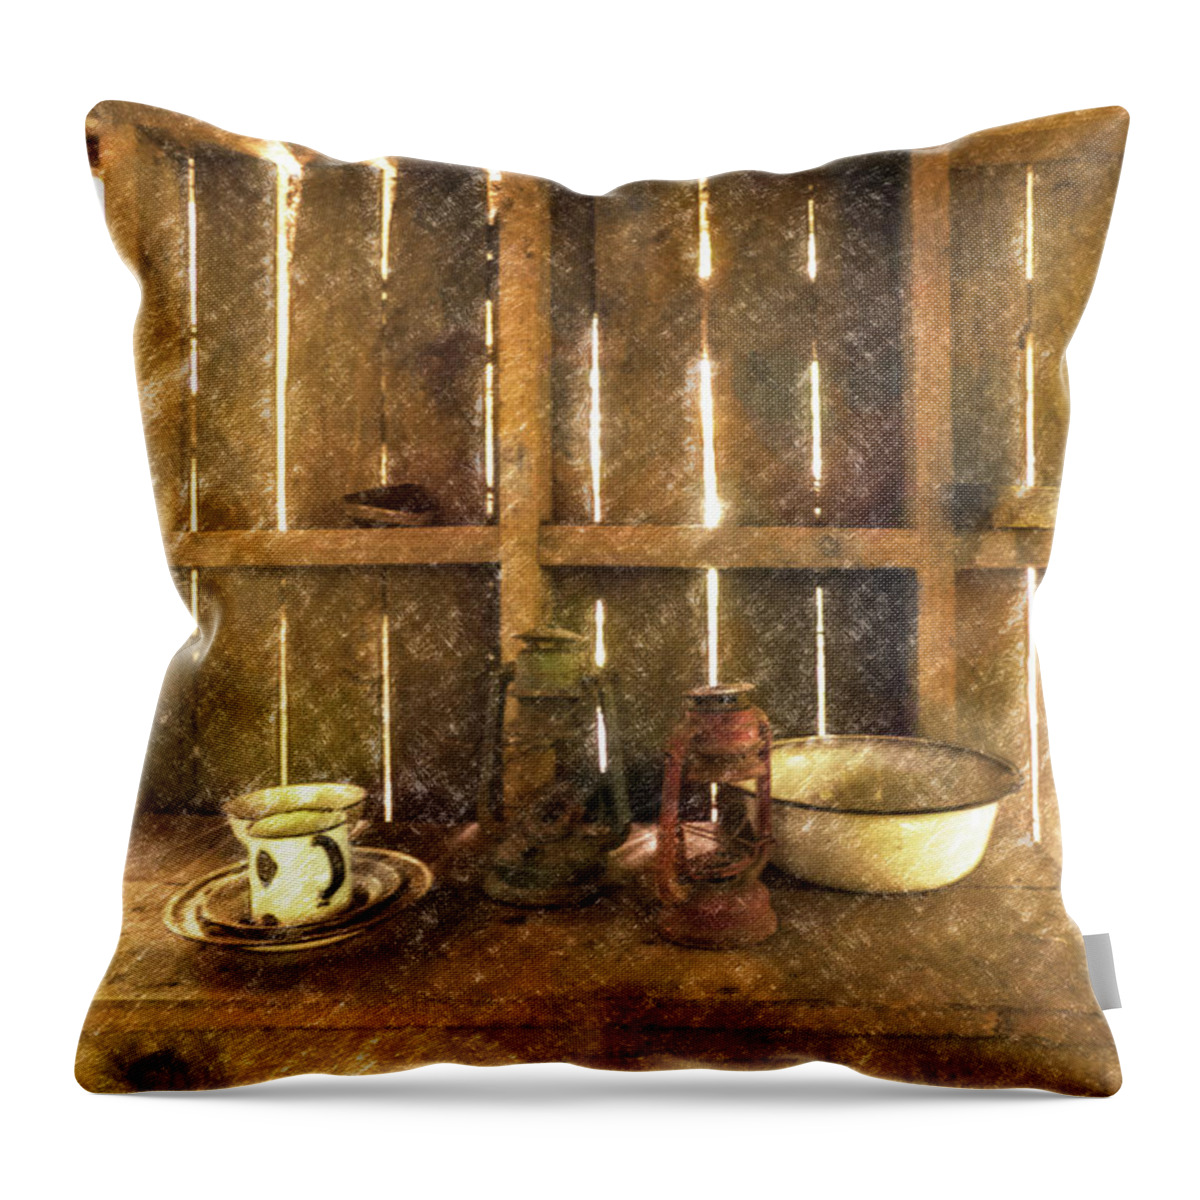 Draughty Throw Pillow featuring the digital art The Abandoned Cabin by Steve Taylor